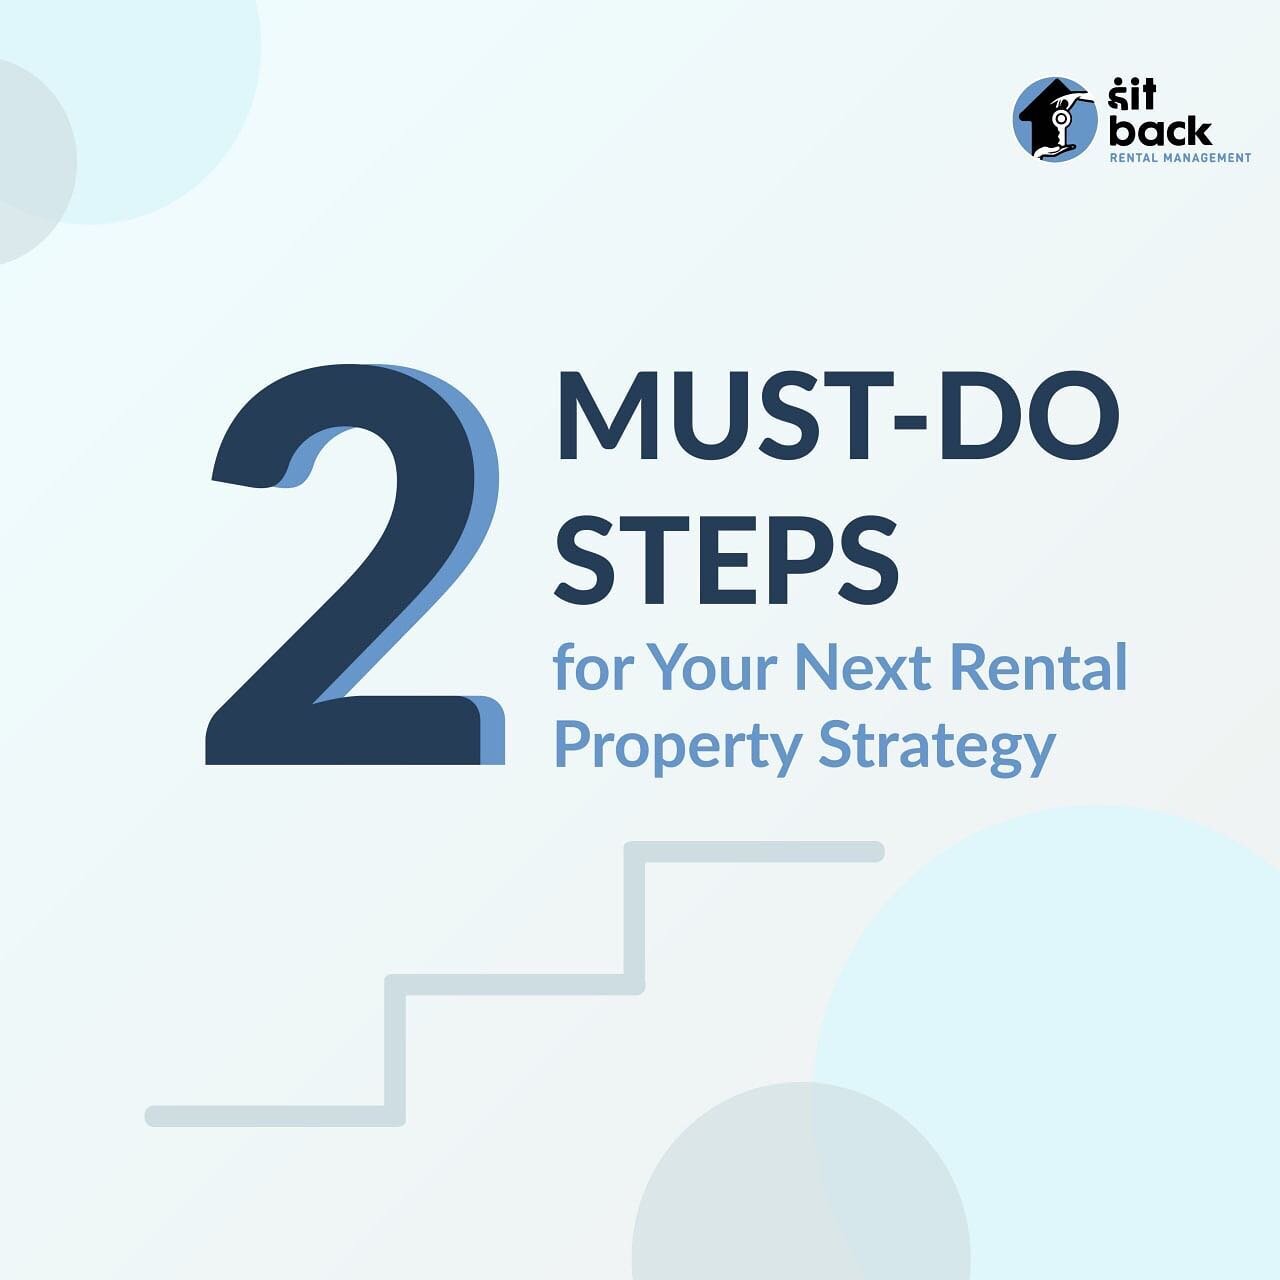 Never blindly jump into property rentals without a strategy. You may think that short-term rental is the trend yet it may not be suitable for your property's area. 

At SitBack, we take pride in setting out a well planned step-by-step approach for ou